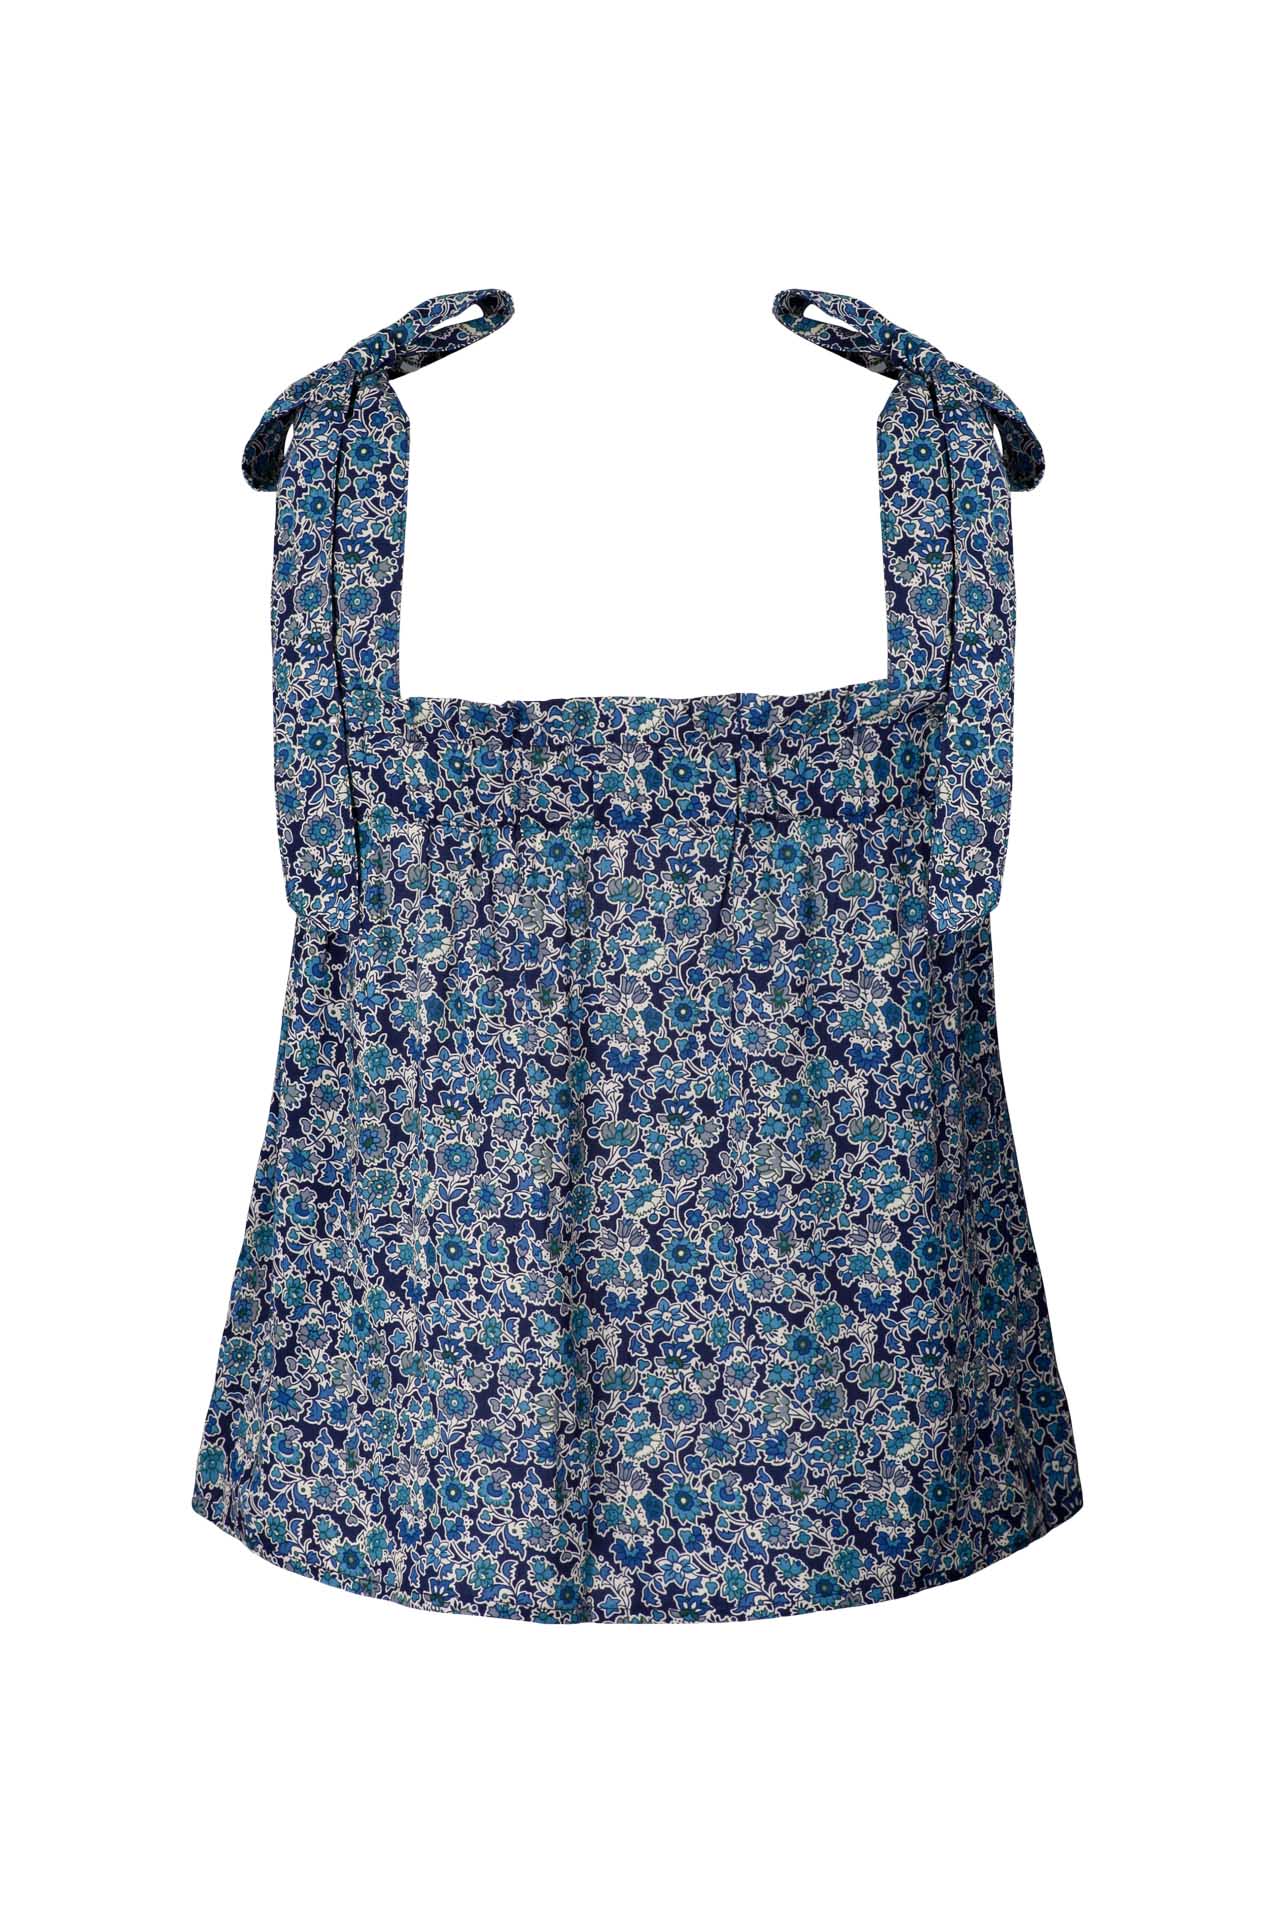 Lollys Laundry Anne Floral Blue Top with Tie Details